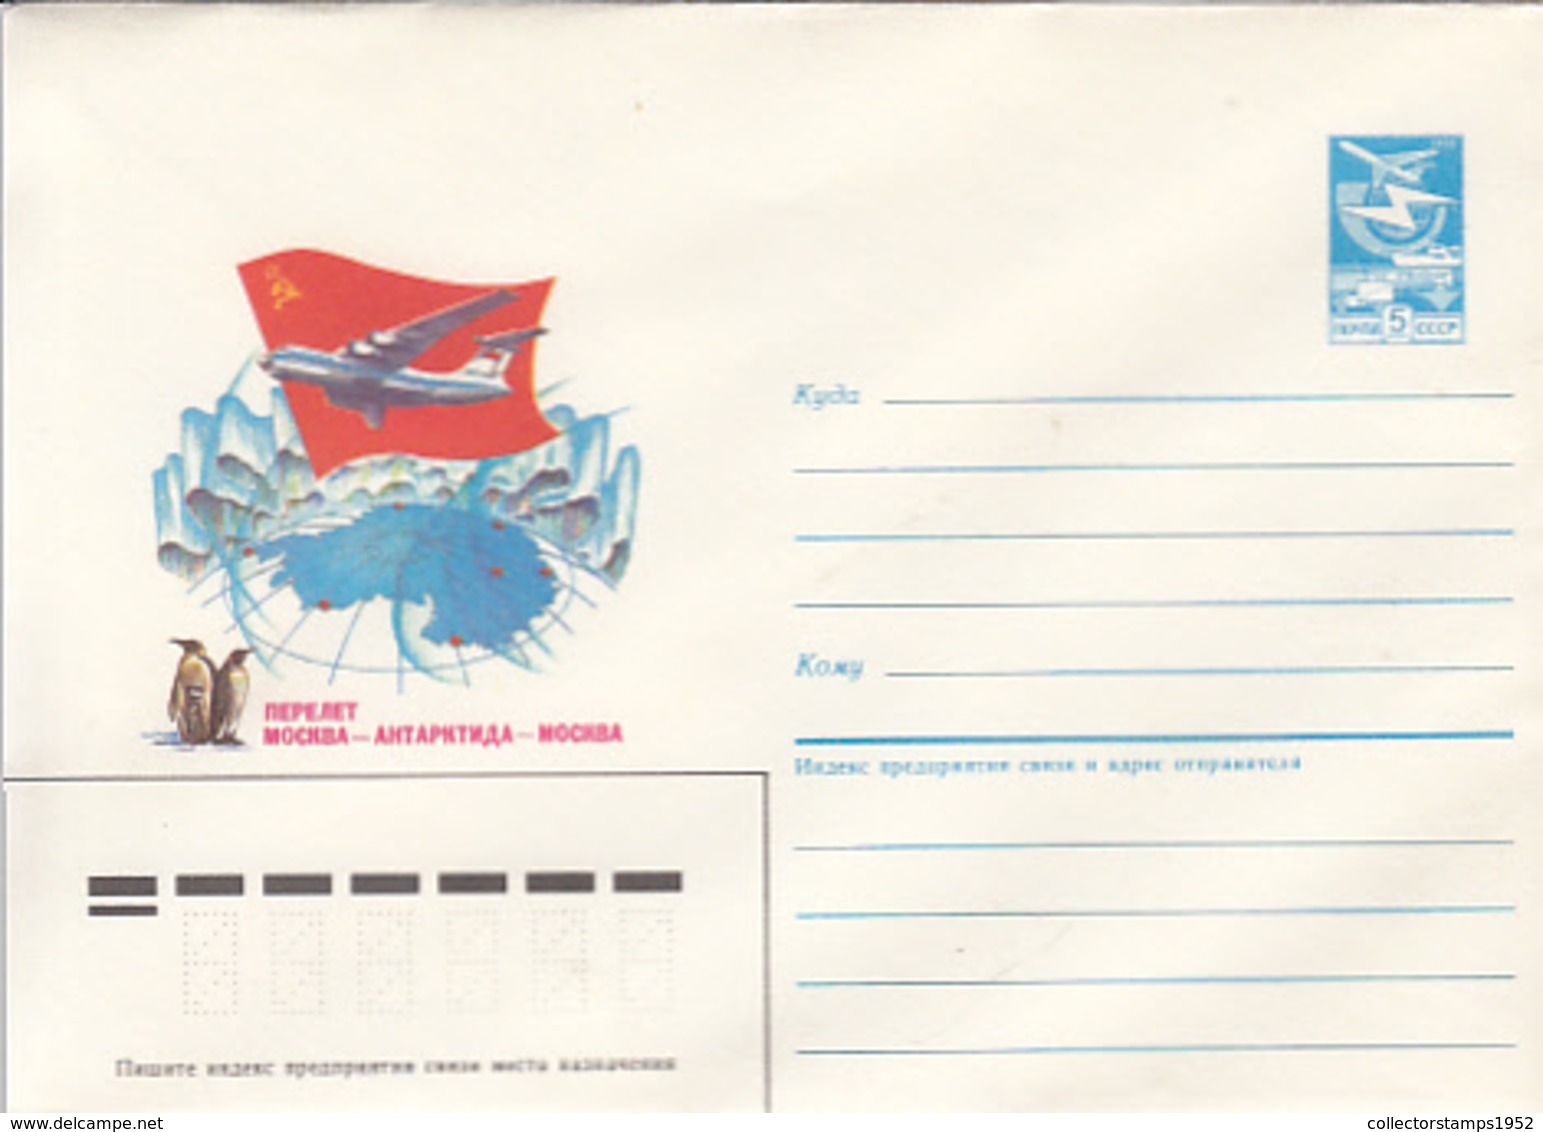 76398- MOSCOW-ANTARCTICA-MOSCOW FLIGHT, PLANE, PENGUINS, POLAR FLIGHTS, COVER STATIONERY, 1986, RUSSIA-USSR - Polare Flüge